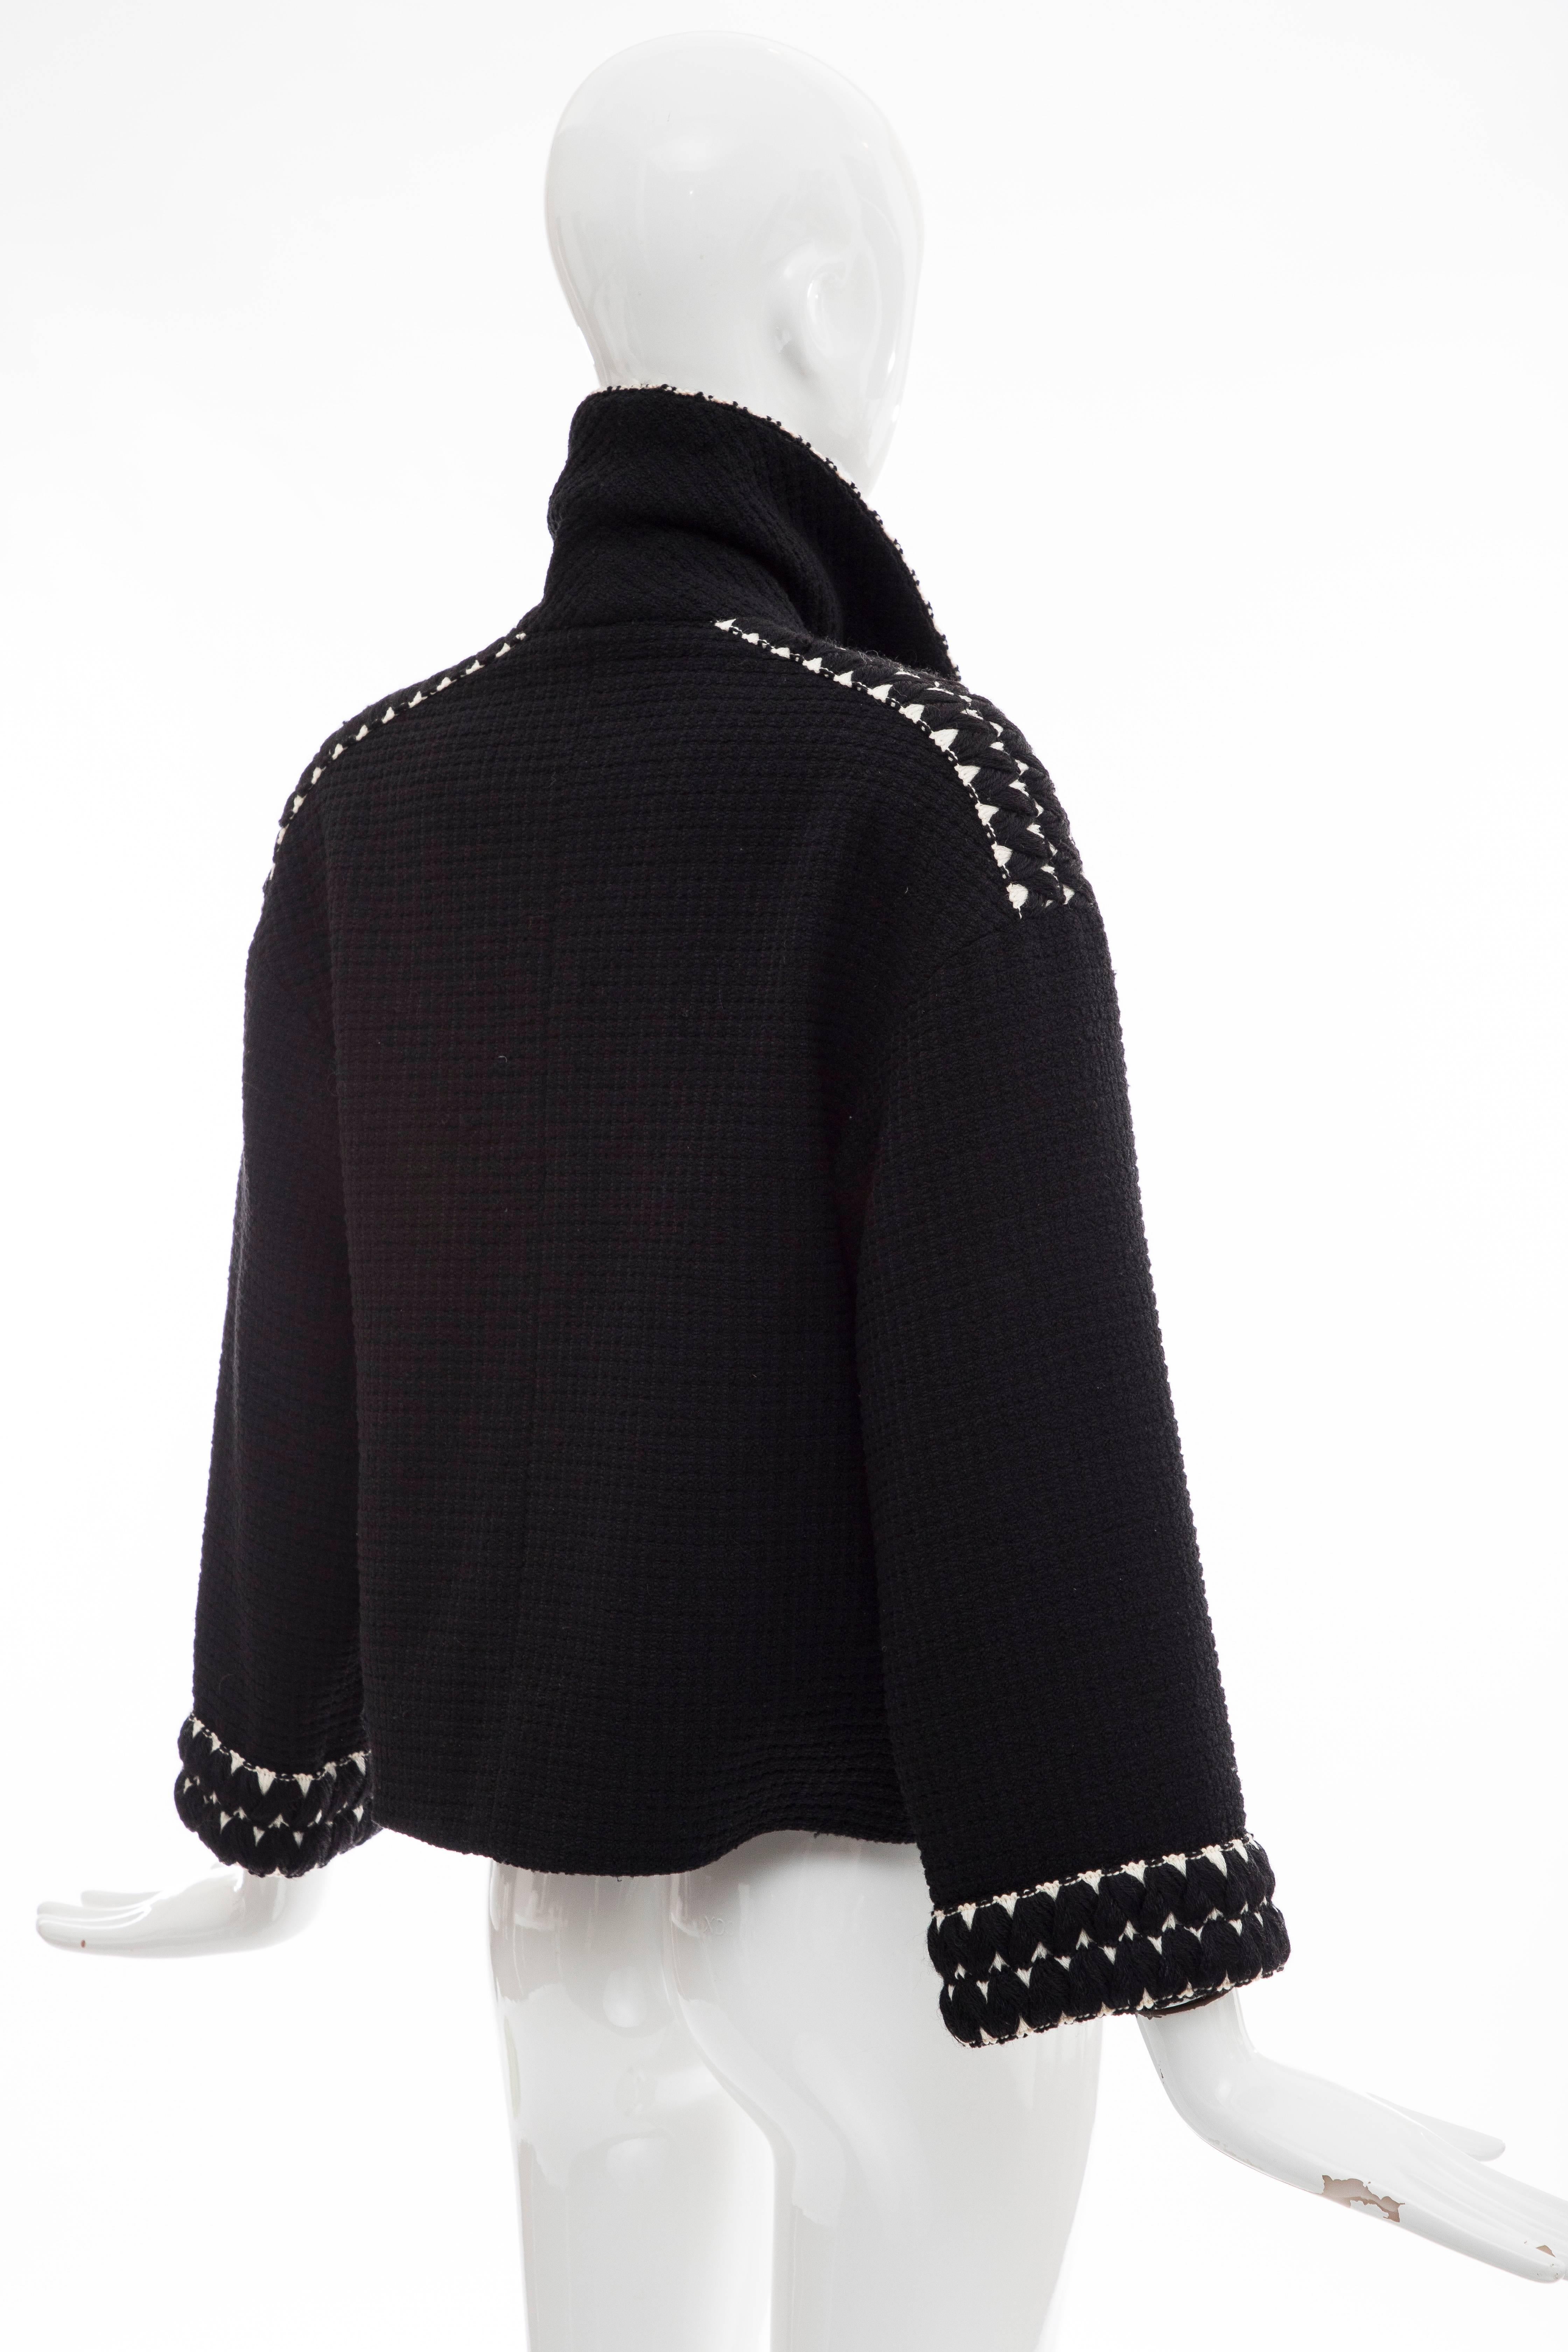 Chanel Black Tweed Jacket With Embroidered Trim, Circa 1980's 2